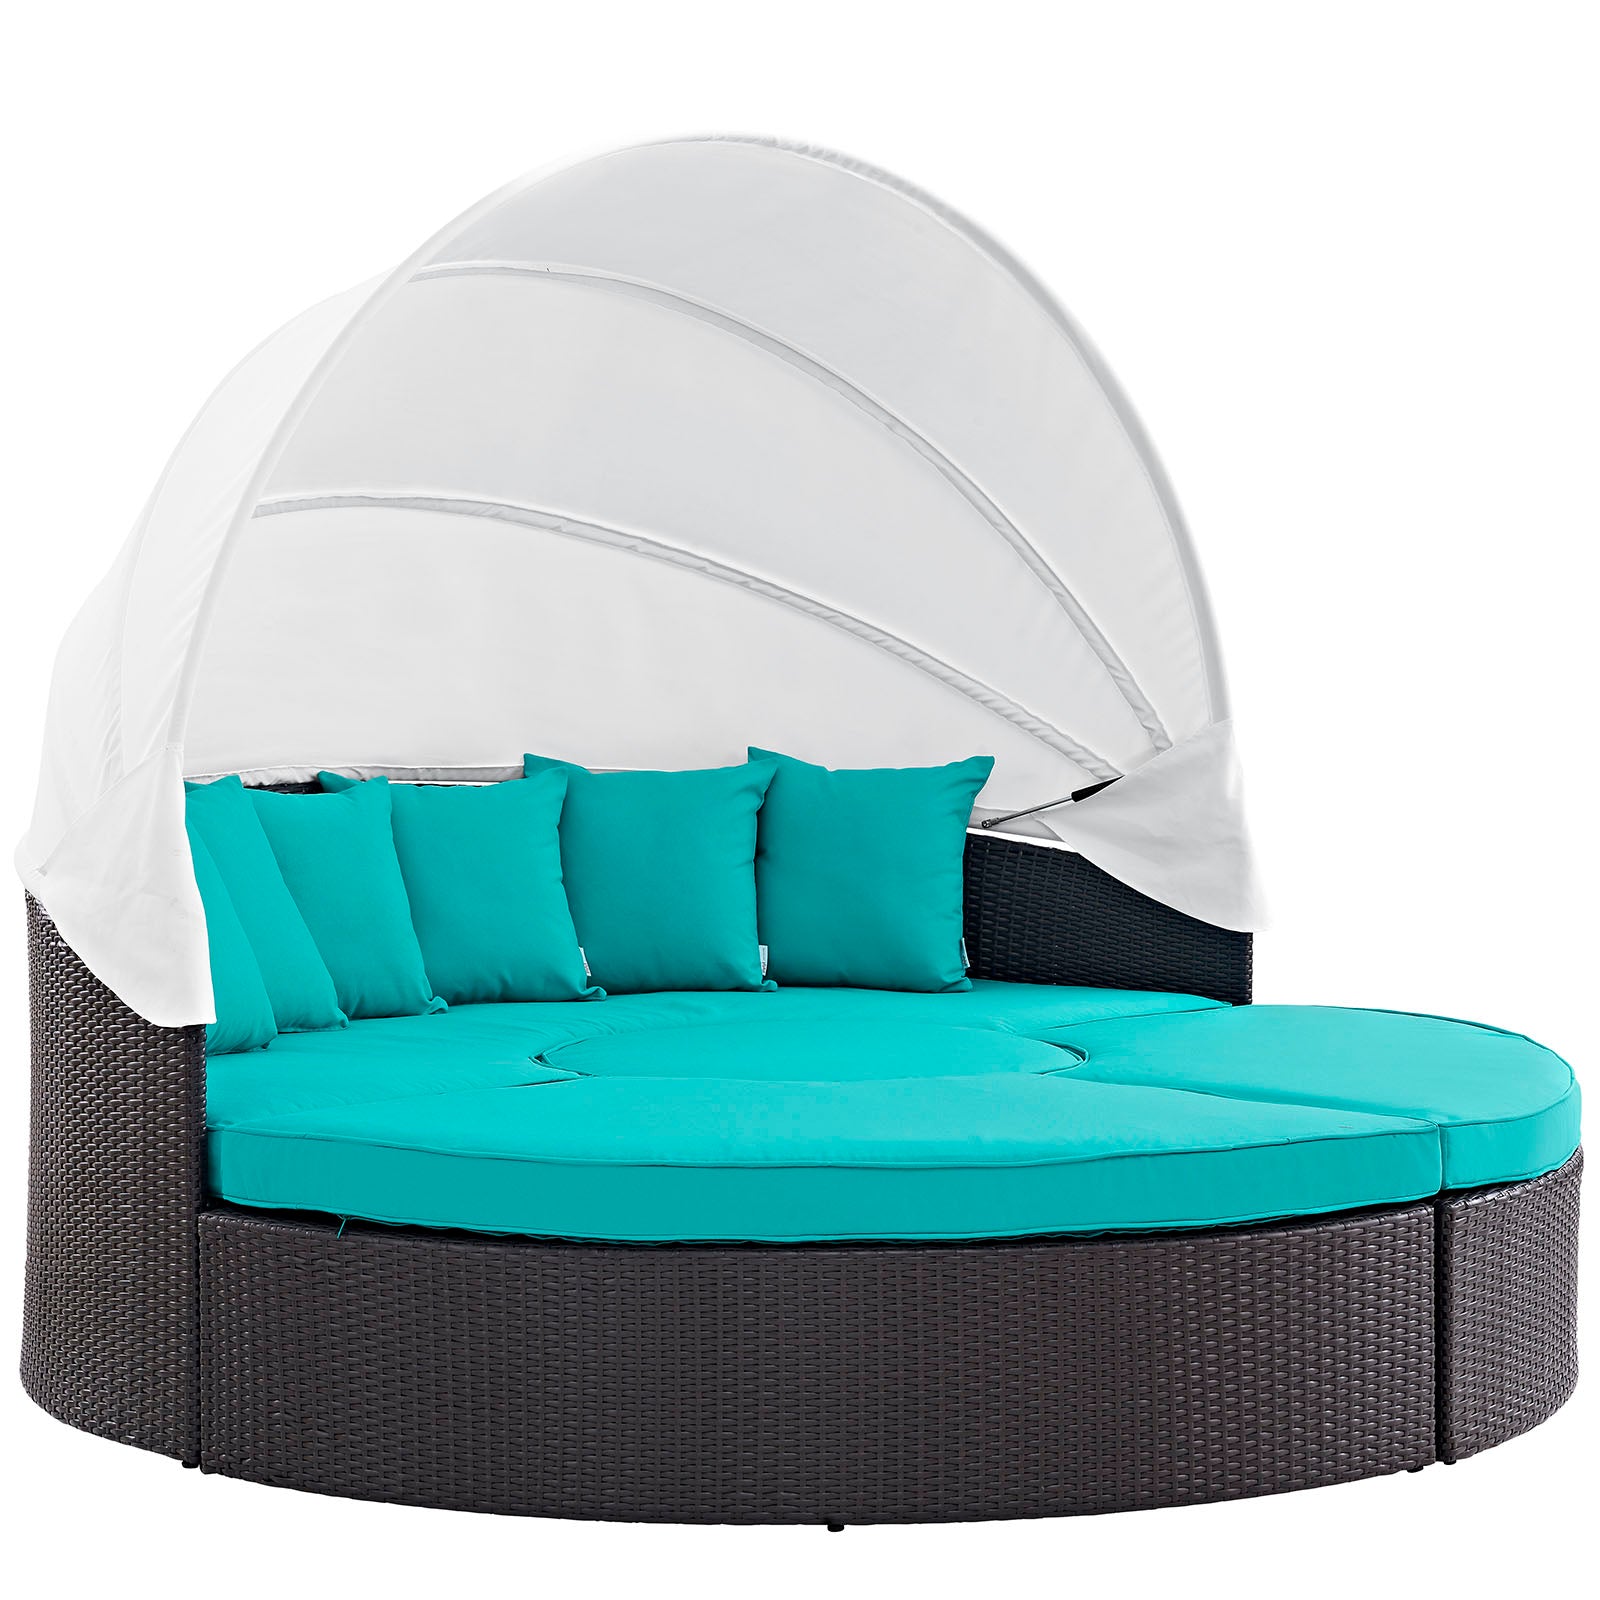 Modway Patio Daybeds - Convene 4 Piece Canopy Outdoor Patio Daybed Espresso & Turquoise